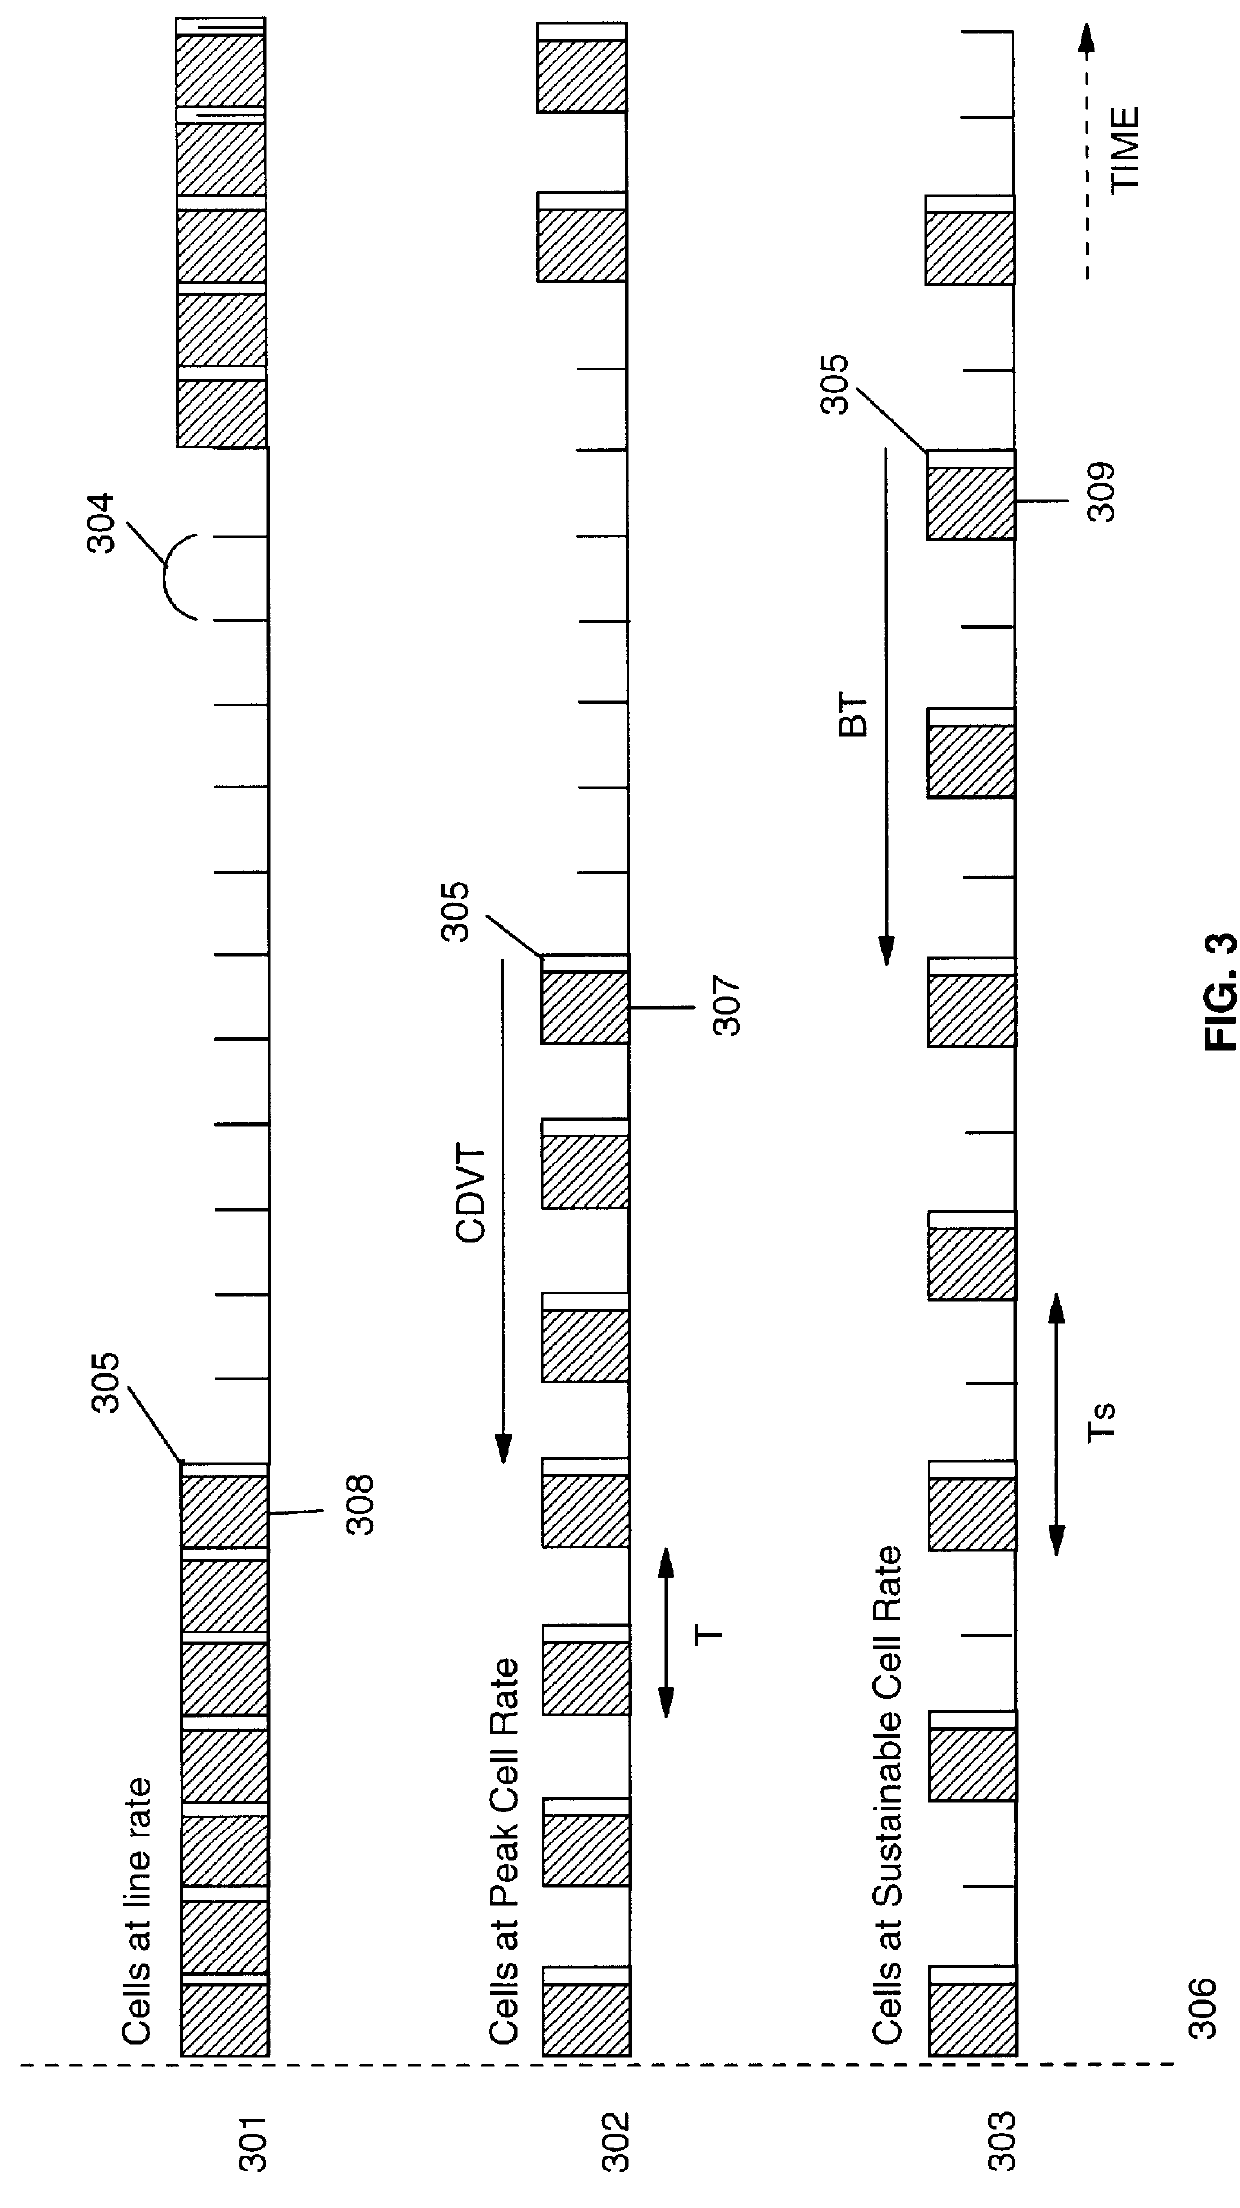 Flow control for very bursty connections in high speed cell switching networks